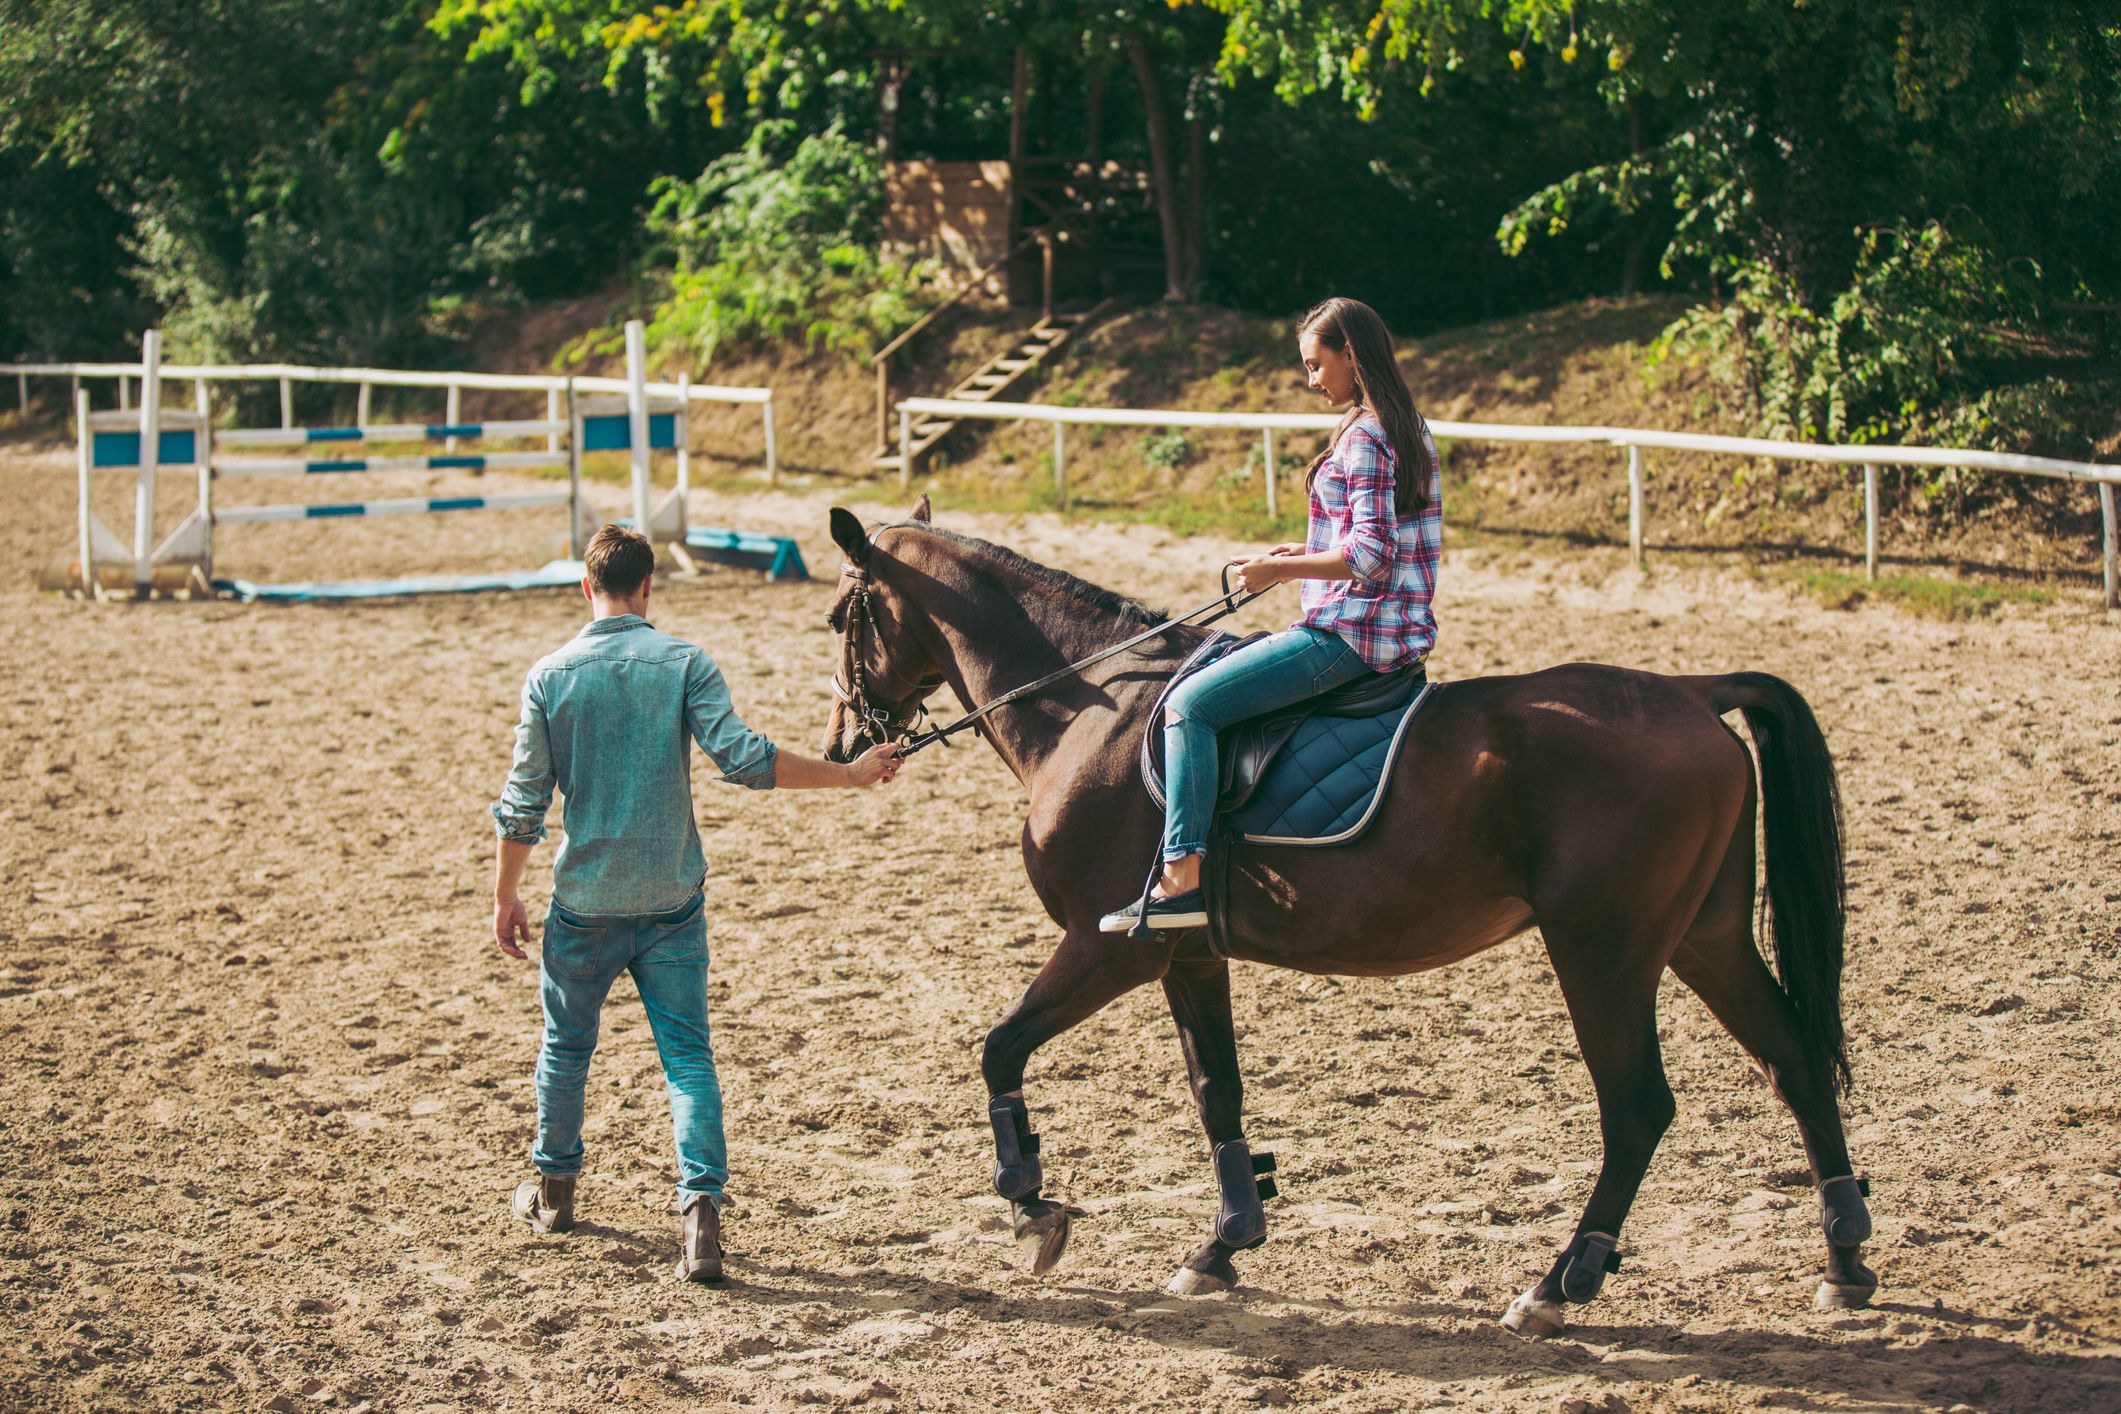 Young woman training horseback riding technique with instructor